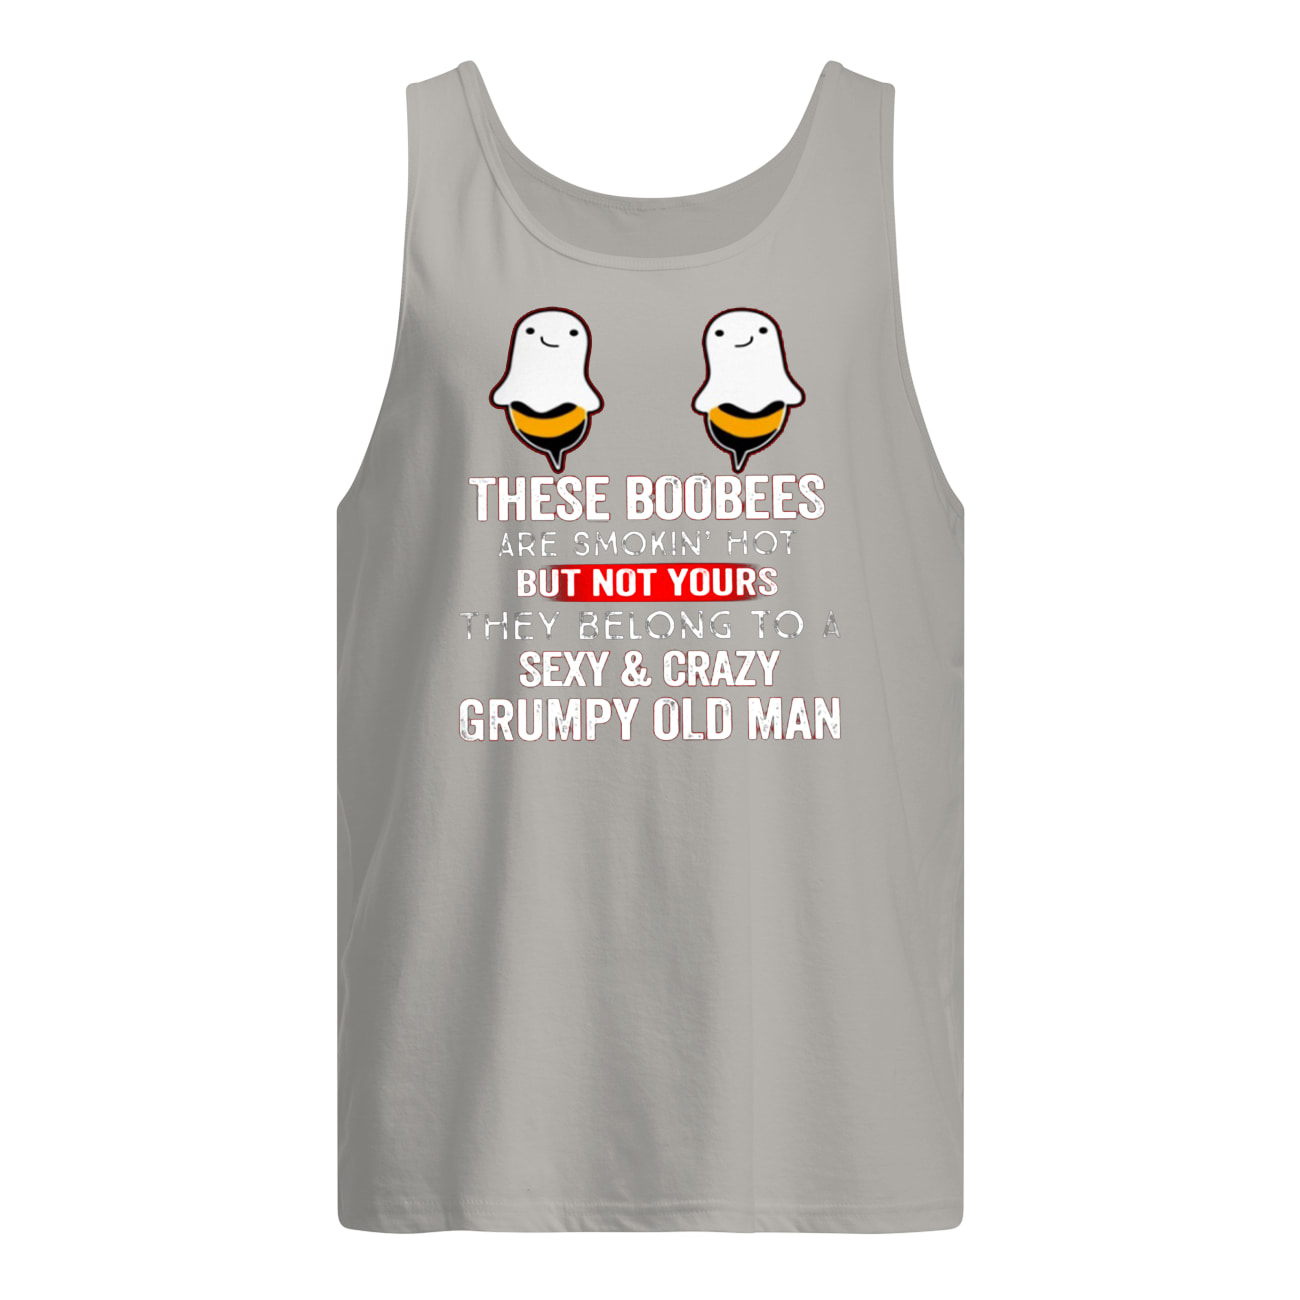 These boobees are smokin' hot but not yours they belong to a sexy and crazy husband tank top